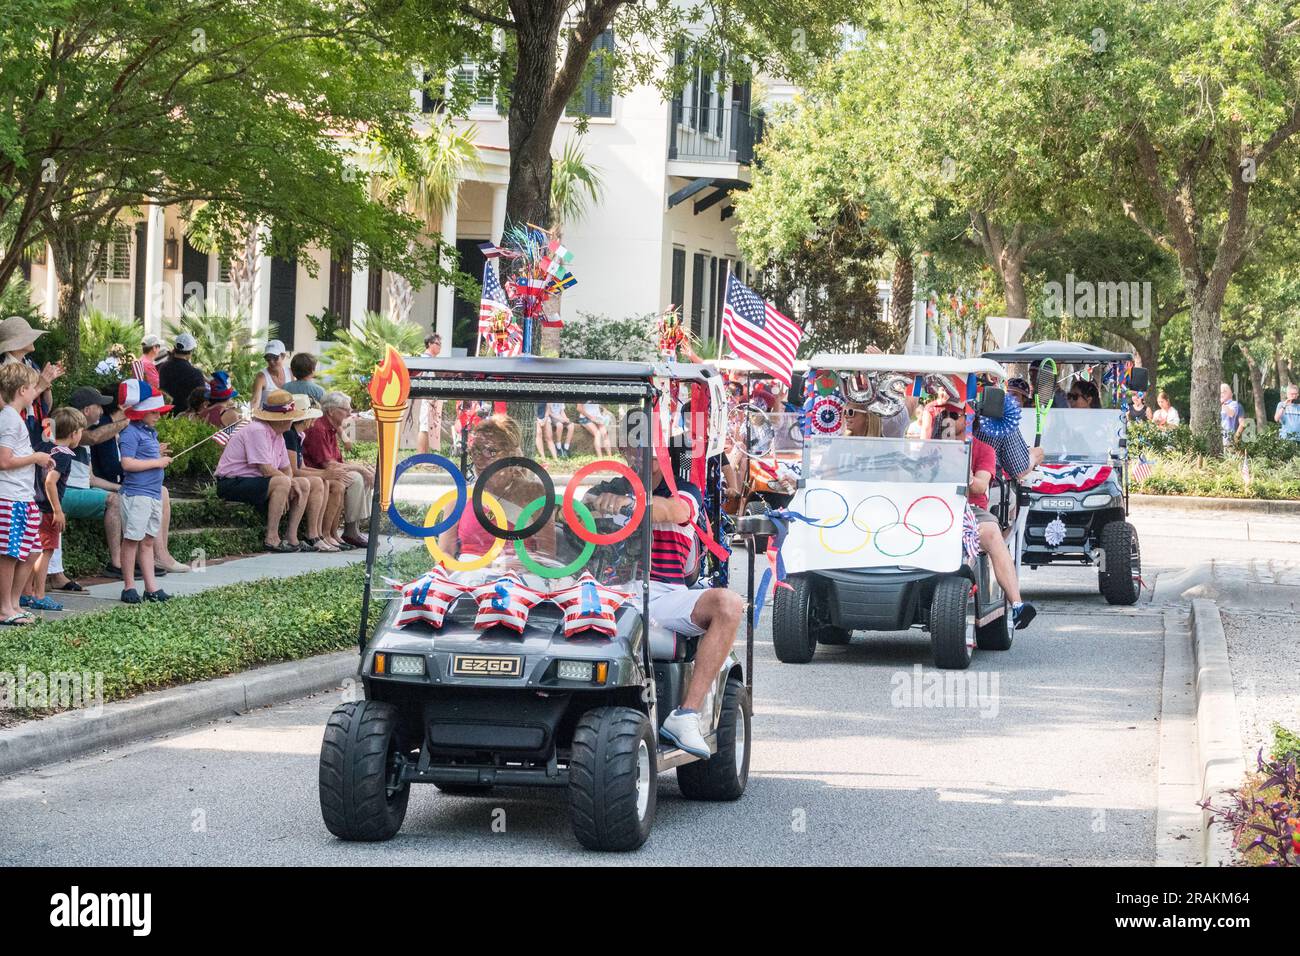 Golf carts decorated in patriotic colors honor the USA Olympic team during the annual Bicycle and Golf cart parade celebrating Independence Day at the I’on Community, July 4, 2021 in Mt Pleasant, South Carolina. Stock Photo